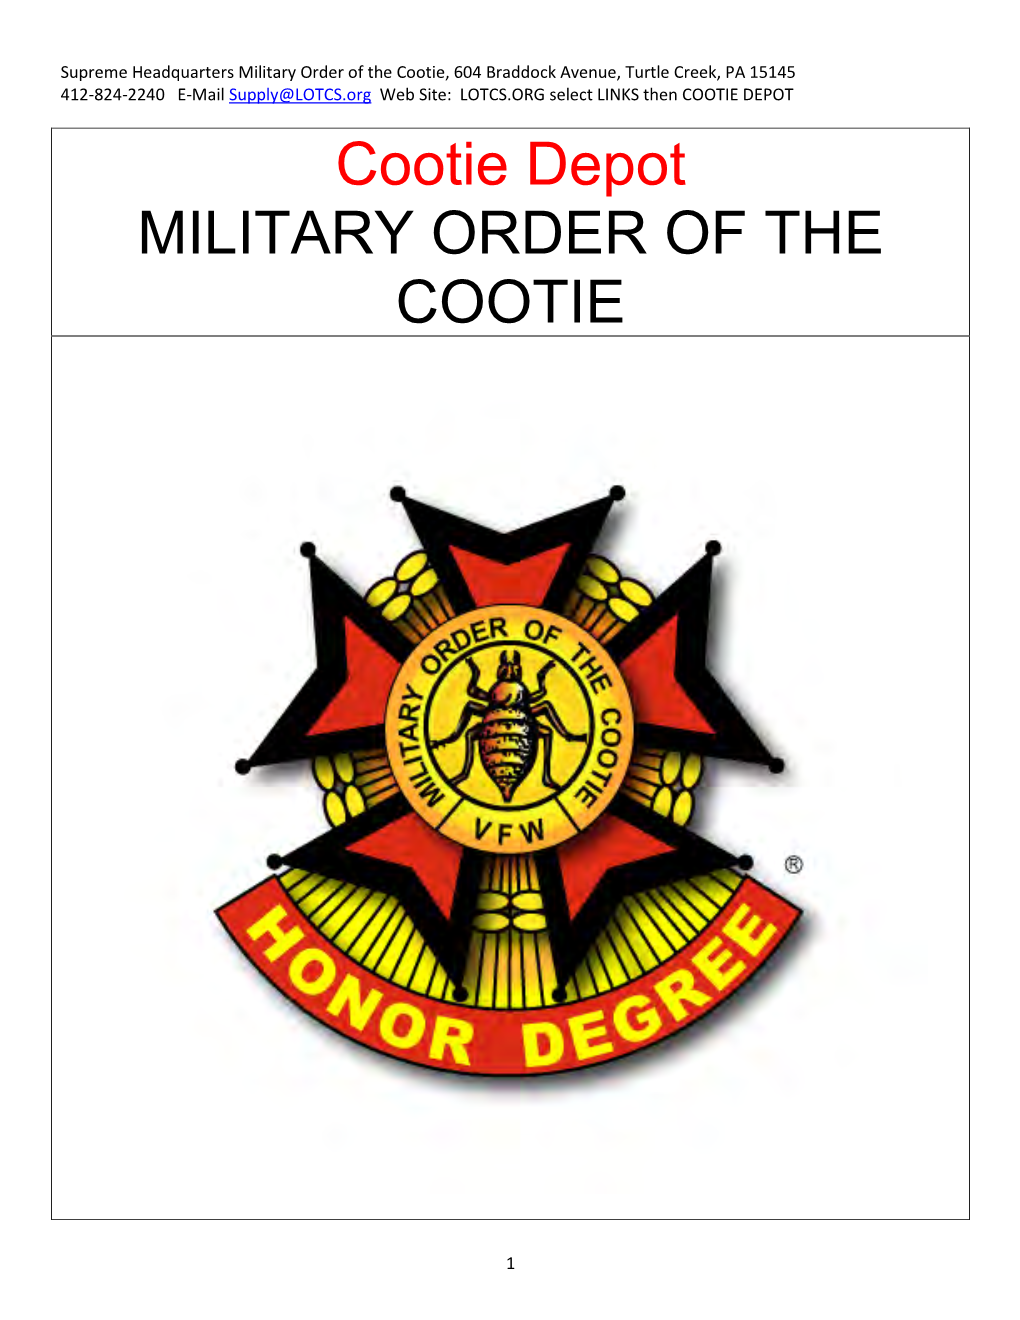 Cootie Depot MILITARY ORDER of the COOTIE